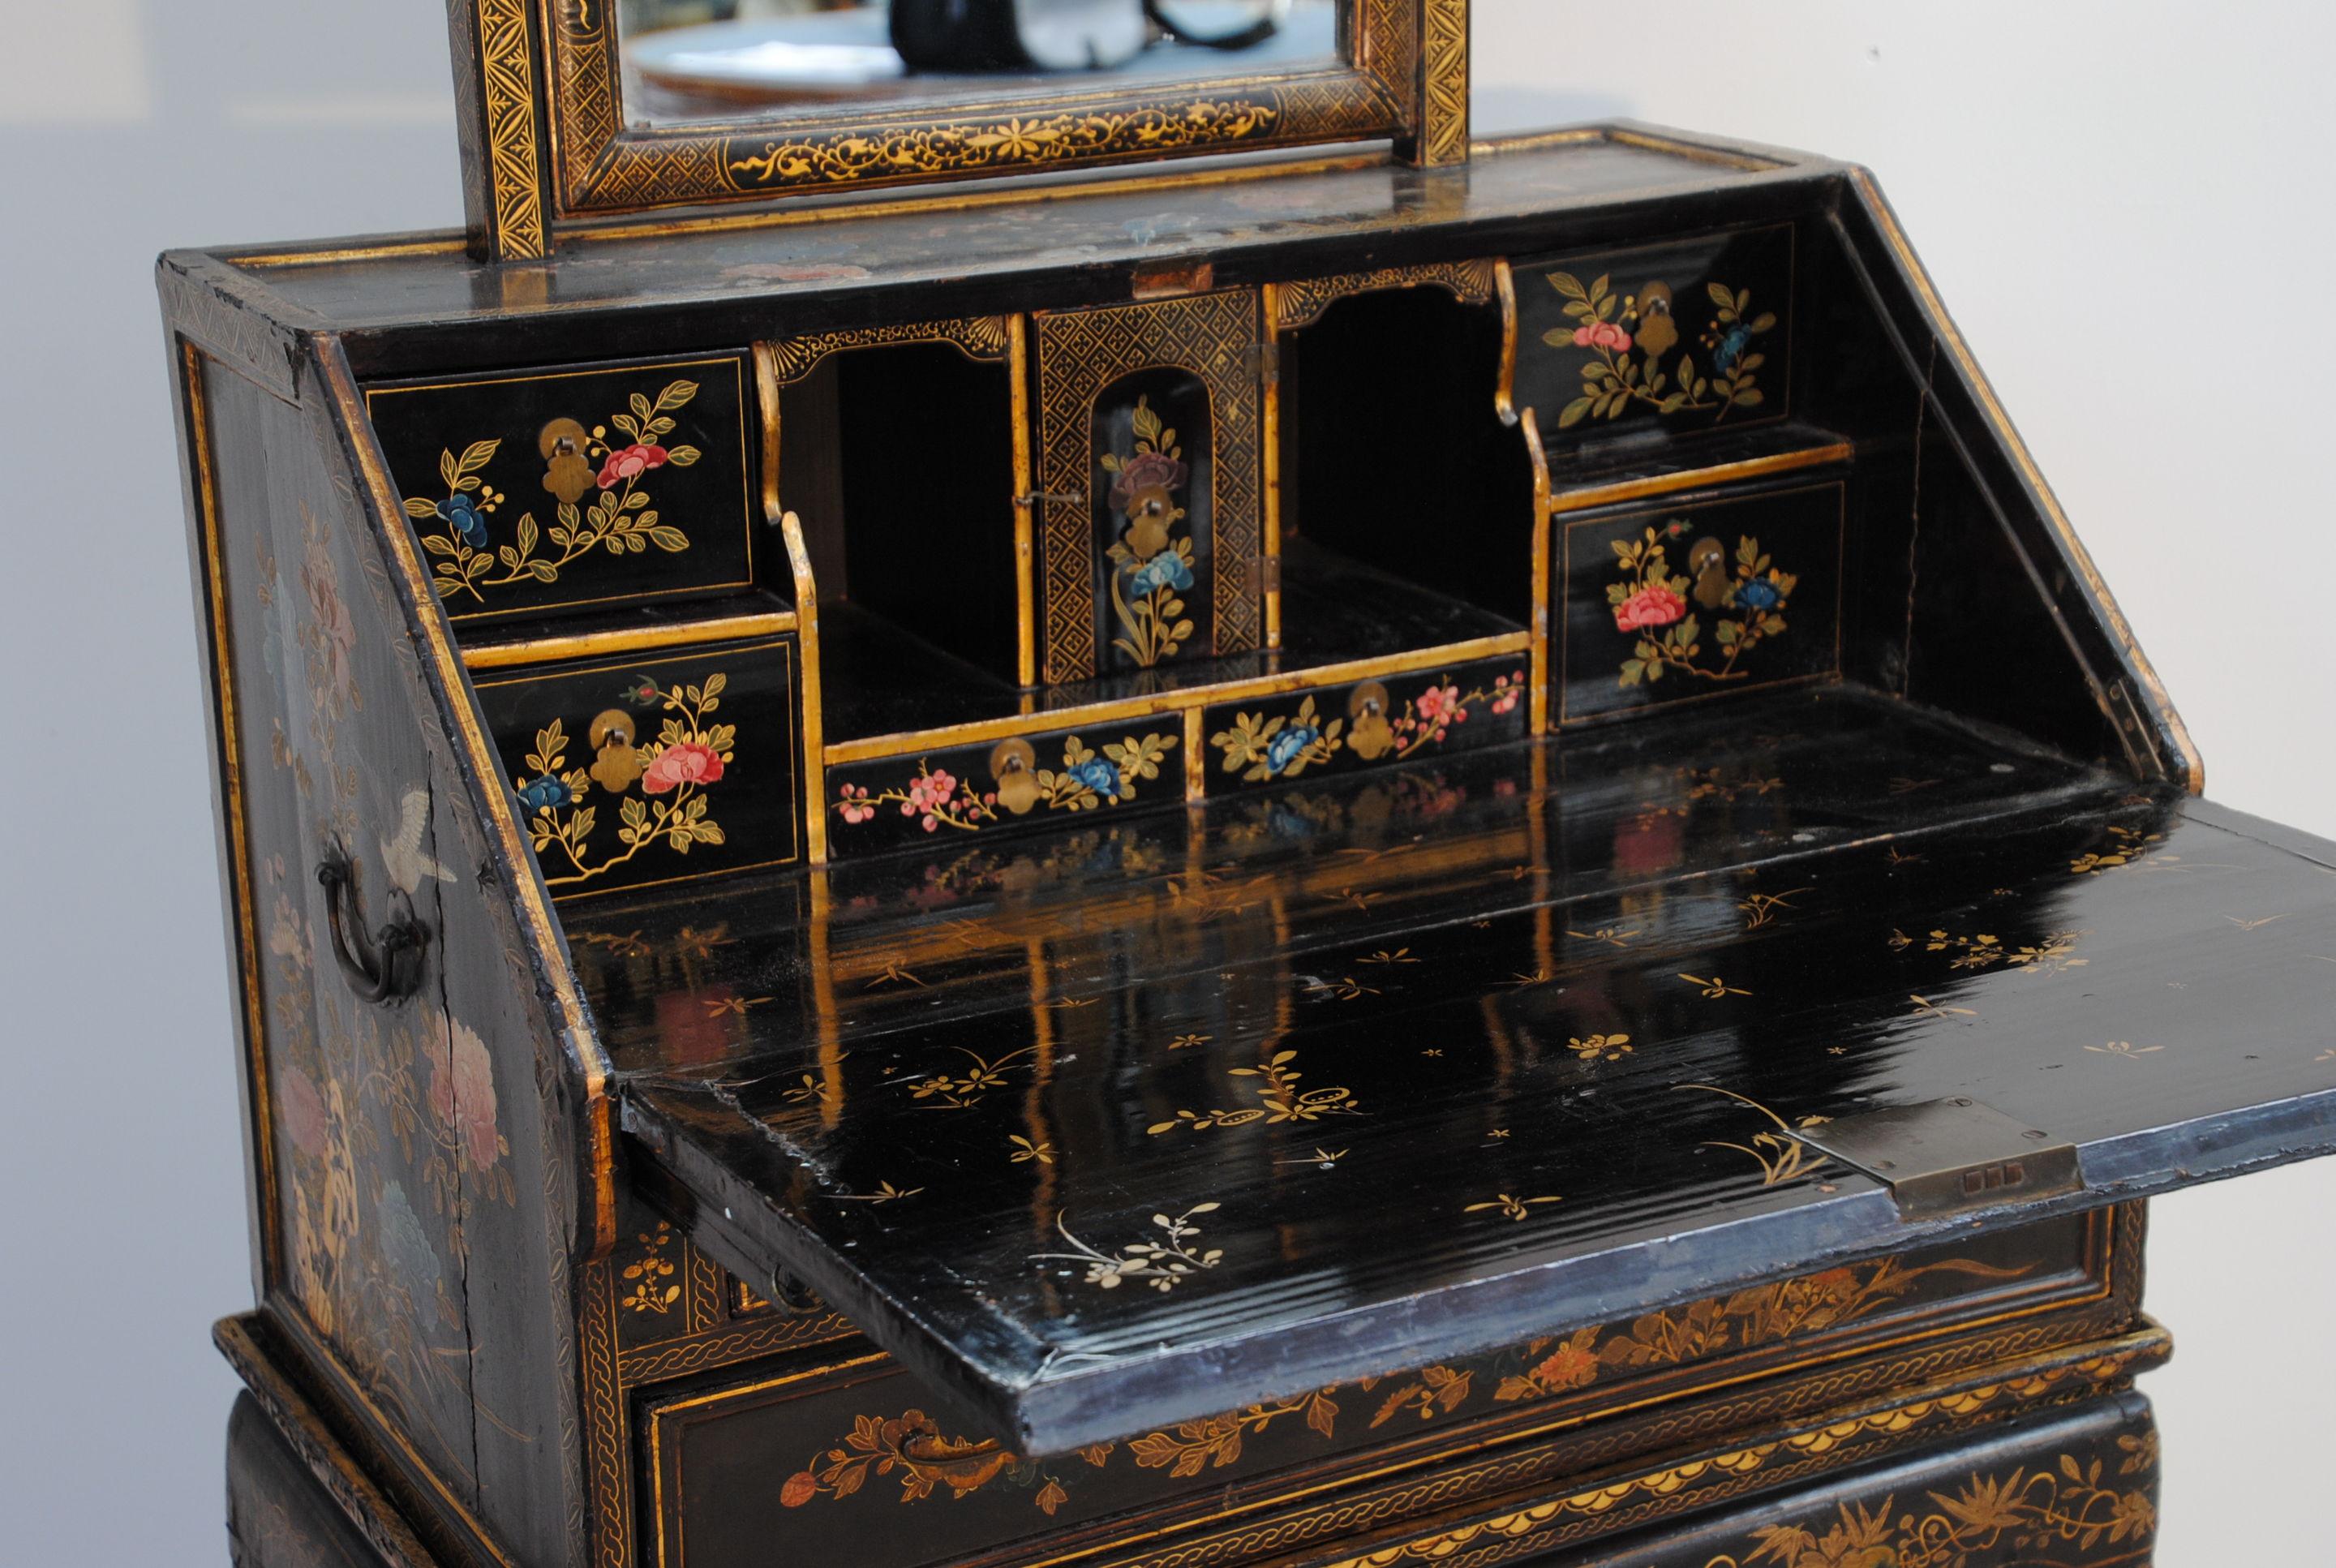 Mid-18th Century 18th Century Chinese Export Lacquer Bureau on Stand